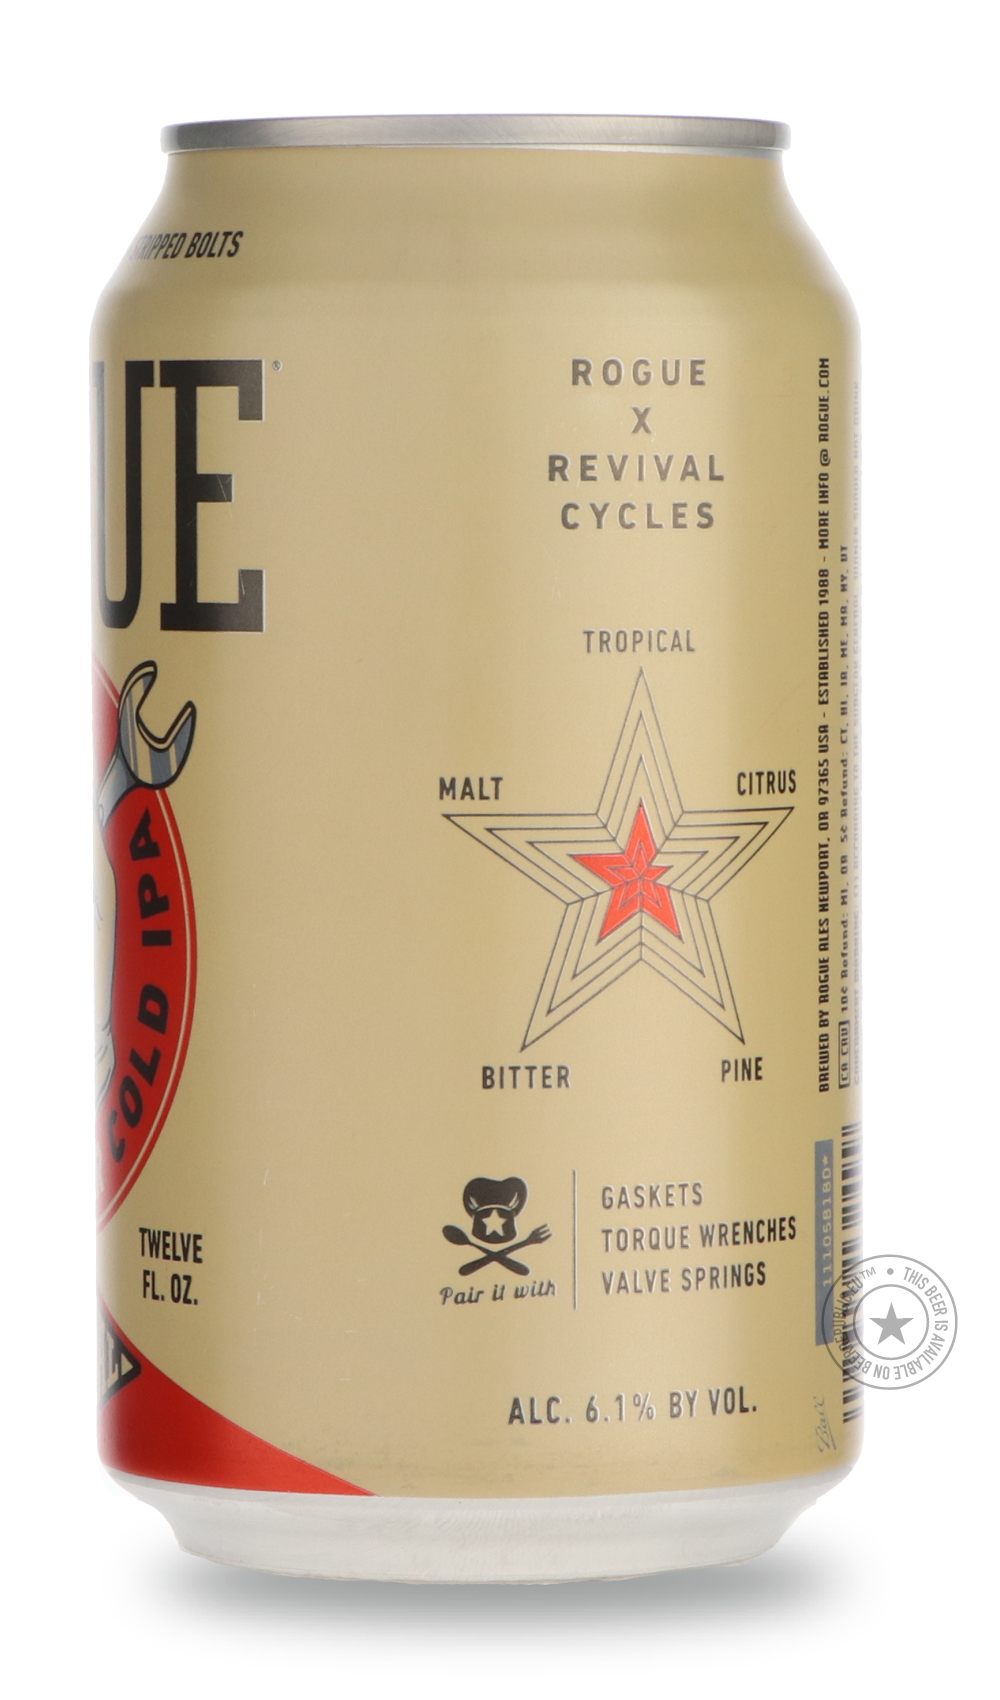 -Rogue- Knuckle Buster-IPA- Only @ Beer Republic - The best online beer store for American & Canadian craft beer - Buy beer online from the USA and Canada - Bier online kopen - Amerikaans bier kopen - Craft beer store - Craft beer kopen - Amerikanisch bier kaufen - Bier online kaufen - Acheter biere online - IPA - Stout - Porter - New England IPA - Hazy IPA - Imperial Stout - Barrel Aged - Barrel Aged Imperial Stout - Brown - Dark beer - Blond - Blonde - Pilsner - Lager - Wheat - Weizen - Amber - Barley Win